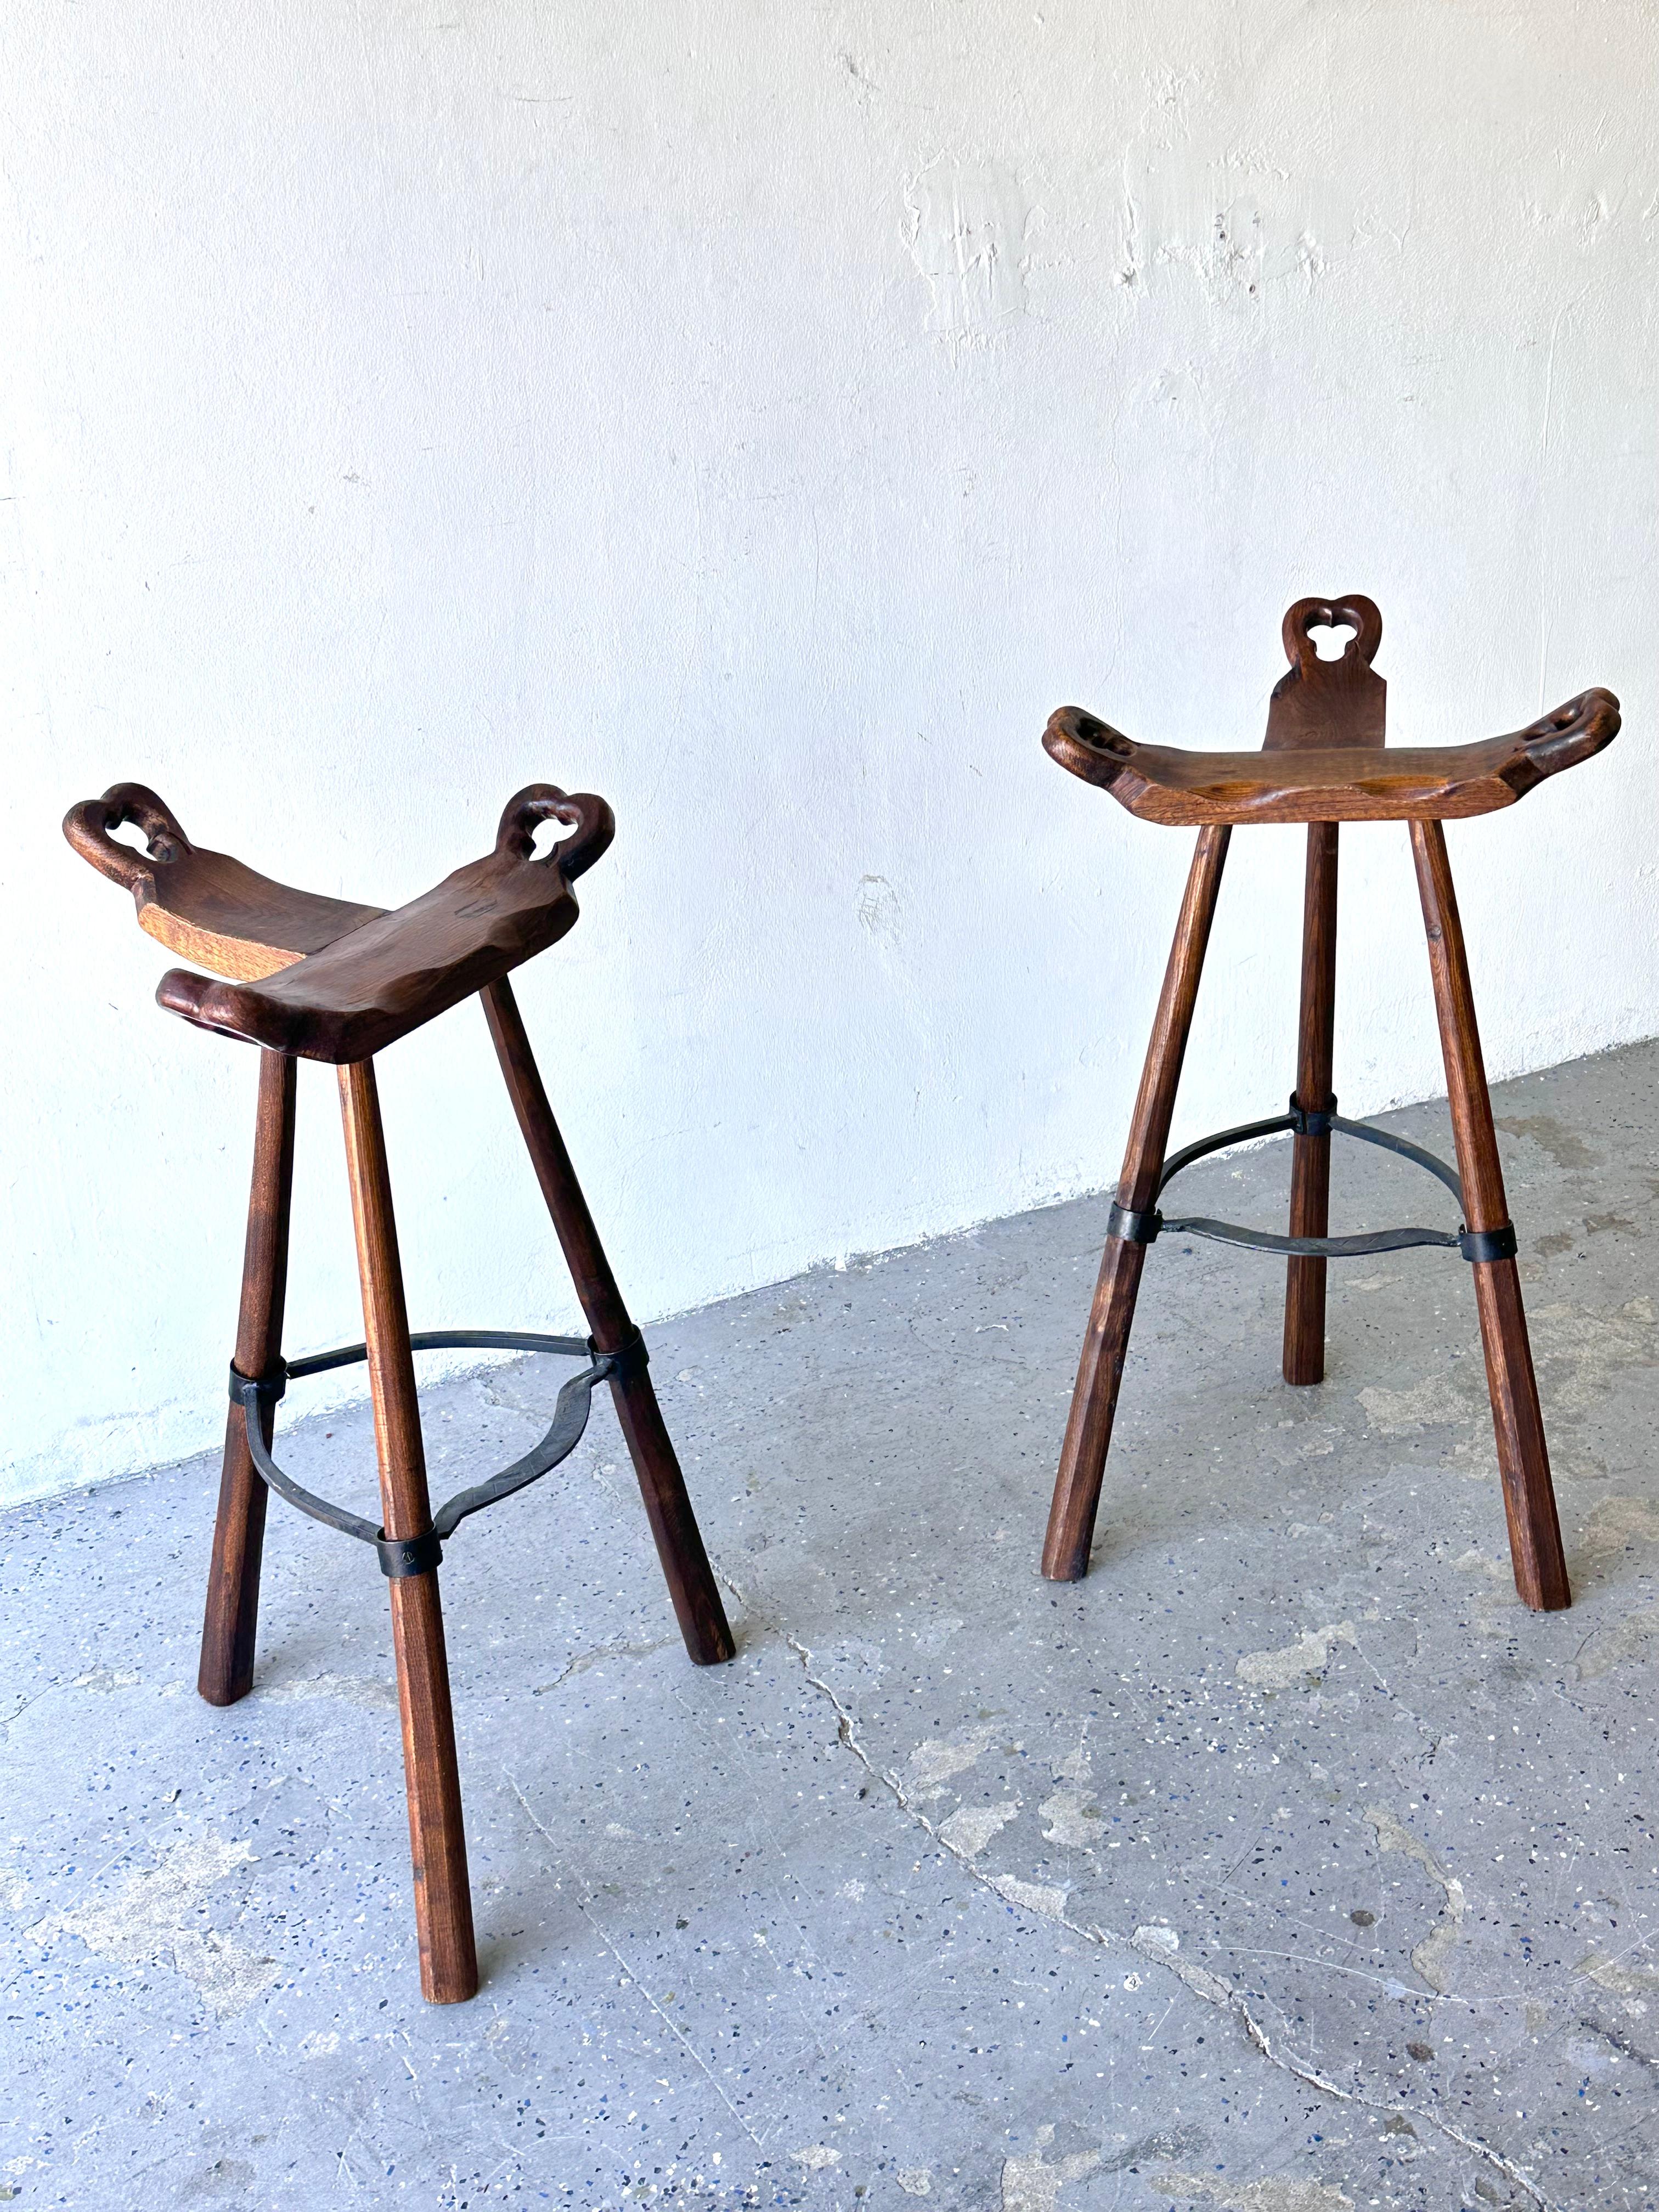 These tripod-base Sergio Rodrigues style bar stools are unique and stunning! Their seats are inspired by primitive birthing chairs. Hand-hammered iron with brutalist texture, and gorgeous wood legs and seats. 

Features:

Seats are inspired by